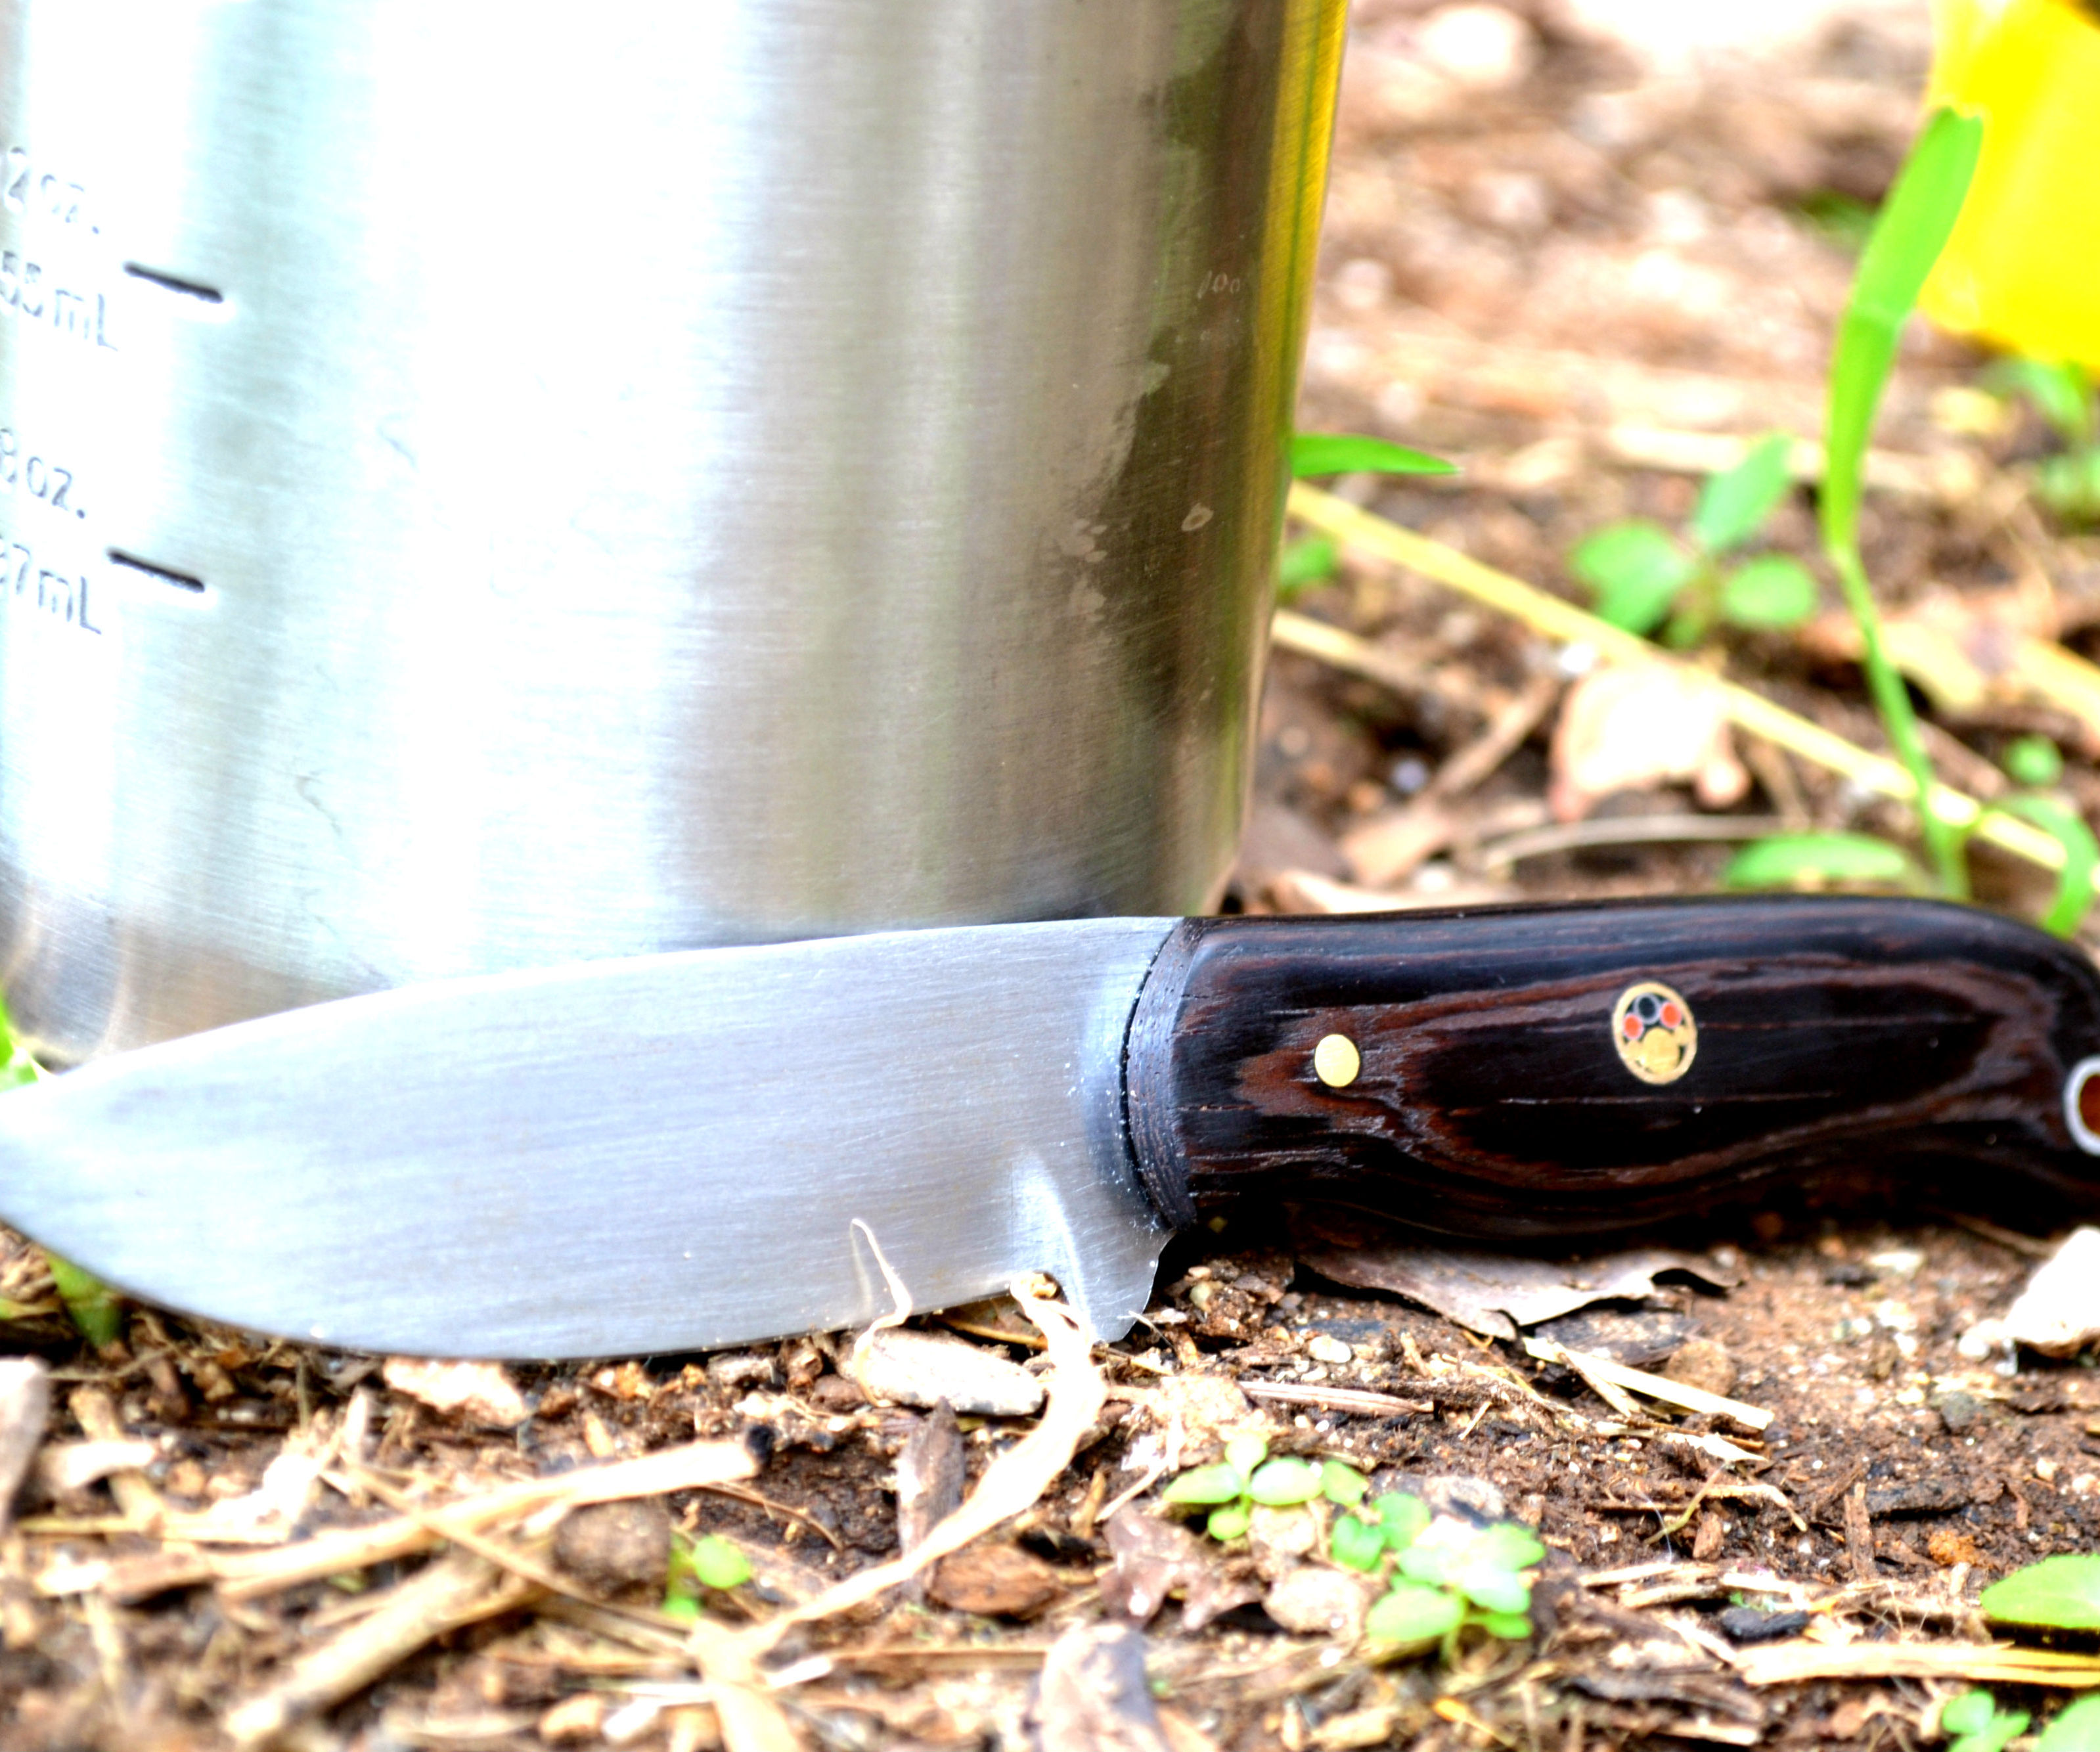 Outdoors Camping/ Bushcraft Knife From Sawblade!